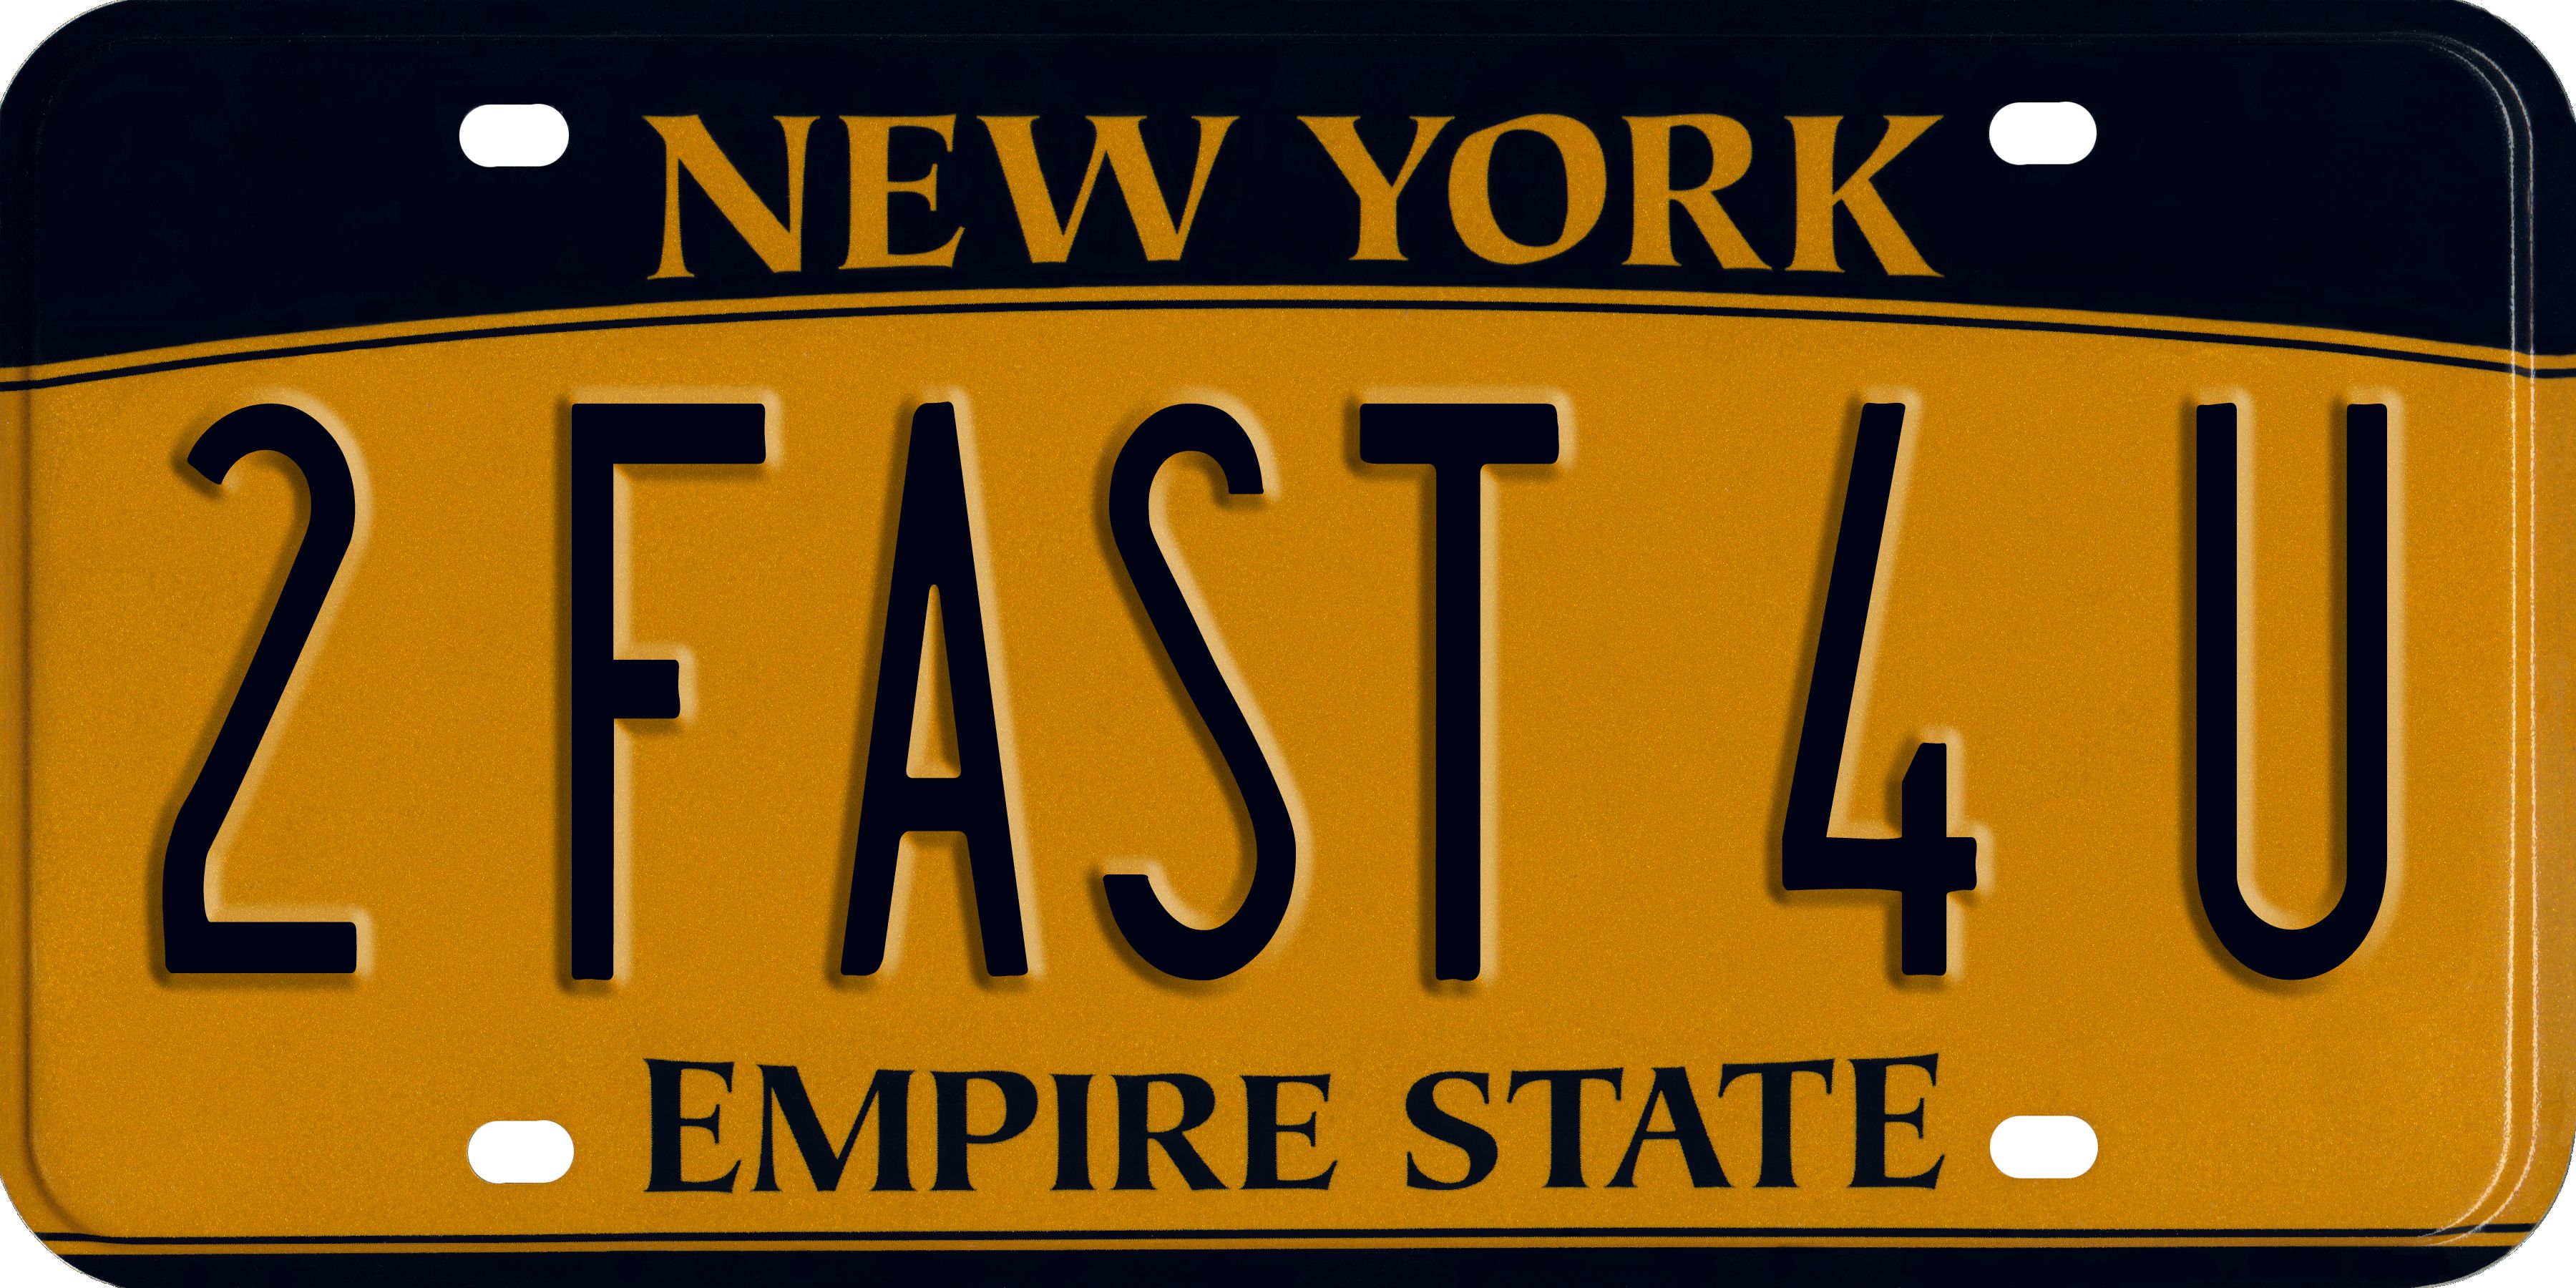 license plates personalized custom made affordable. Funny license plates, Custom license plate, Vanity license plates